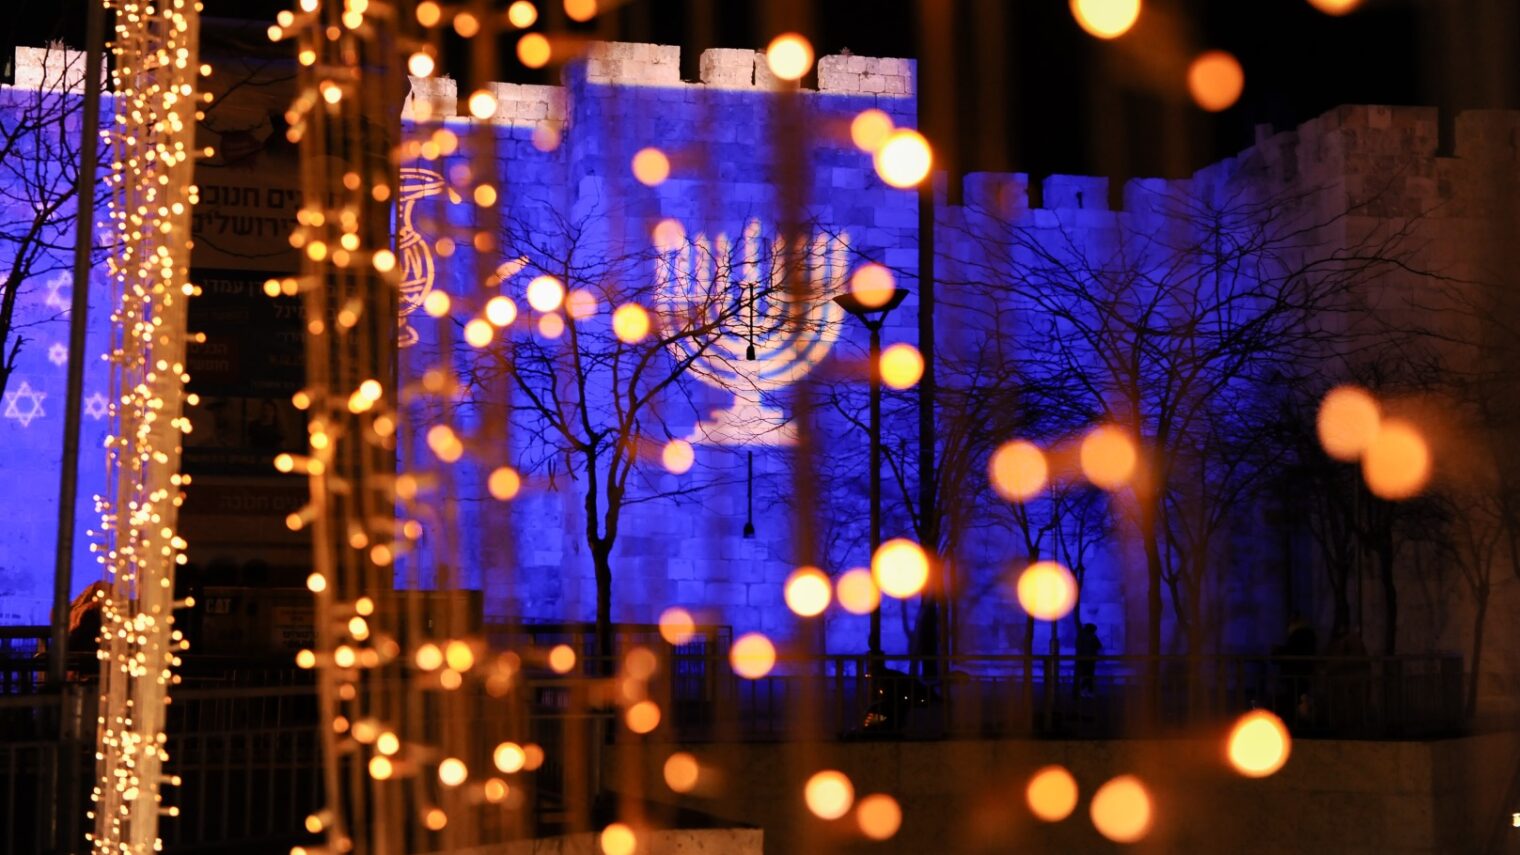 Hanukkah images projected on the Old City walls of Jerusalem. Photo by Mendy Hechtman/FLASH90